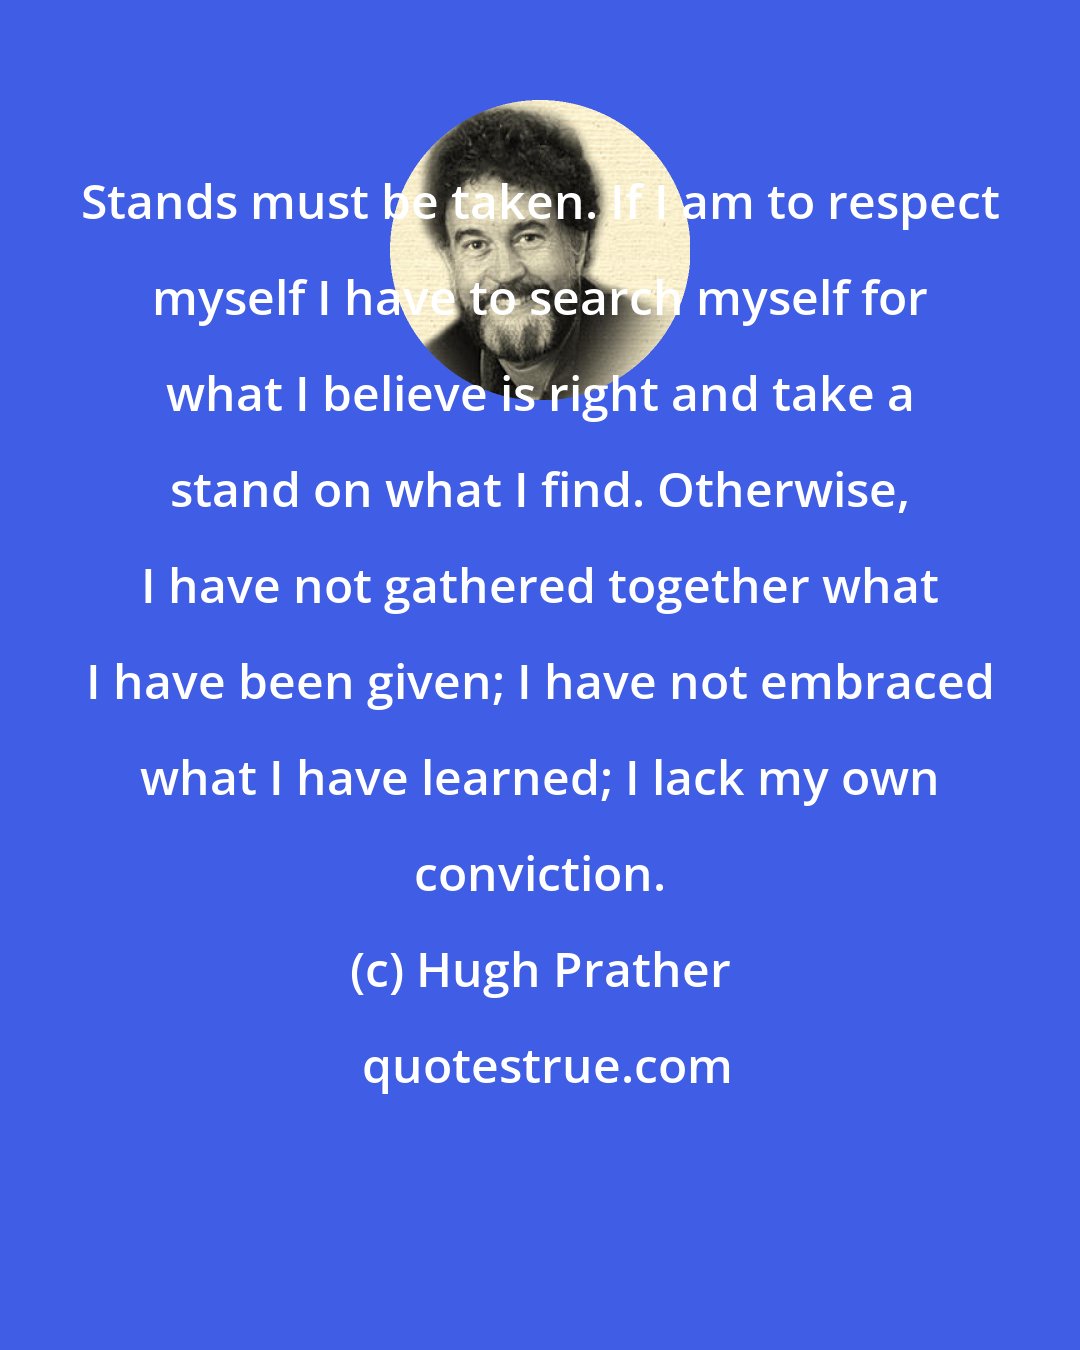 Hugh Prather: Stands must be taken. If I am to respect myself I have to search myself for what I believe is right and take a stand on what I find. Otherwise, I have not gathered together what I have been given; I have not embraced what I have learned; I lack my own conviction.